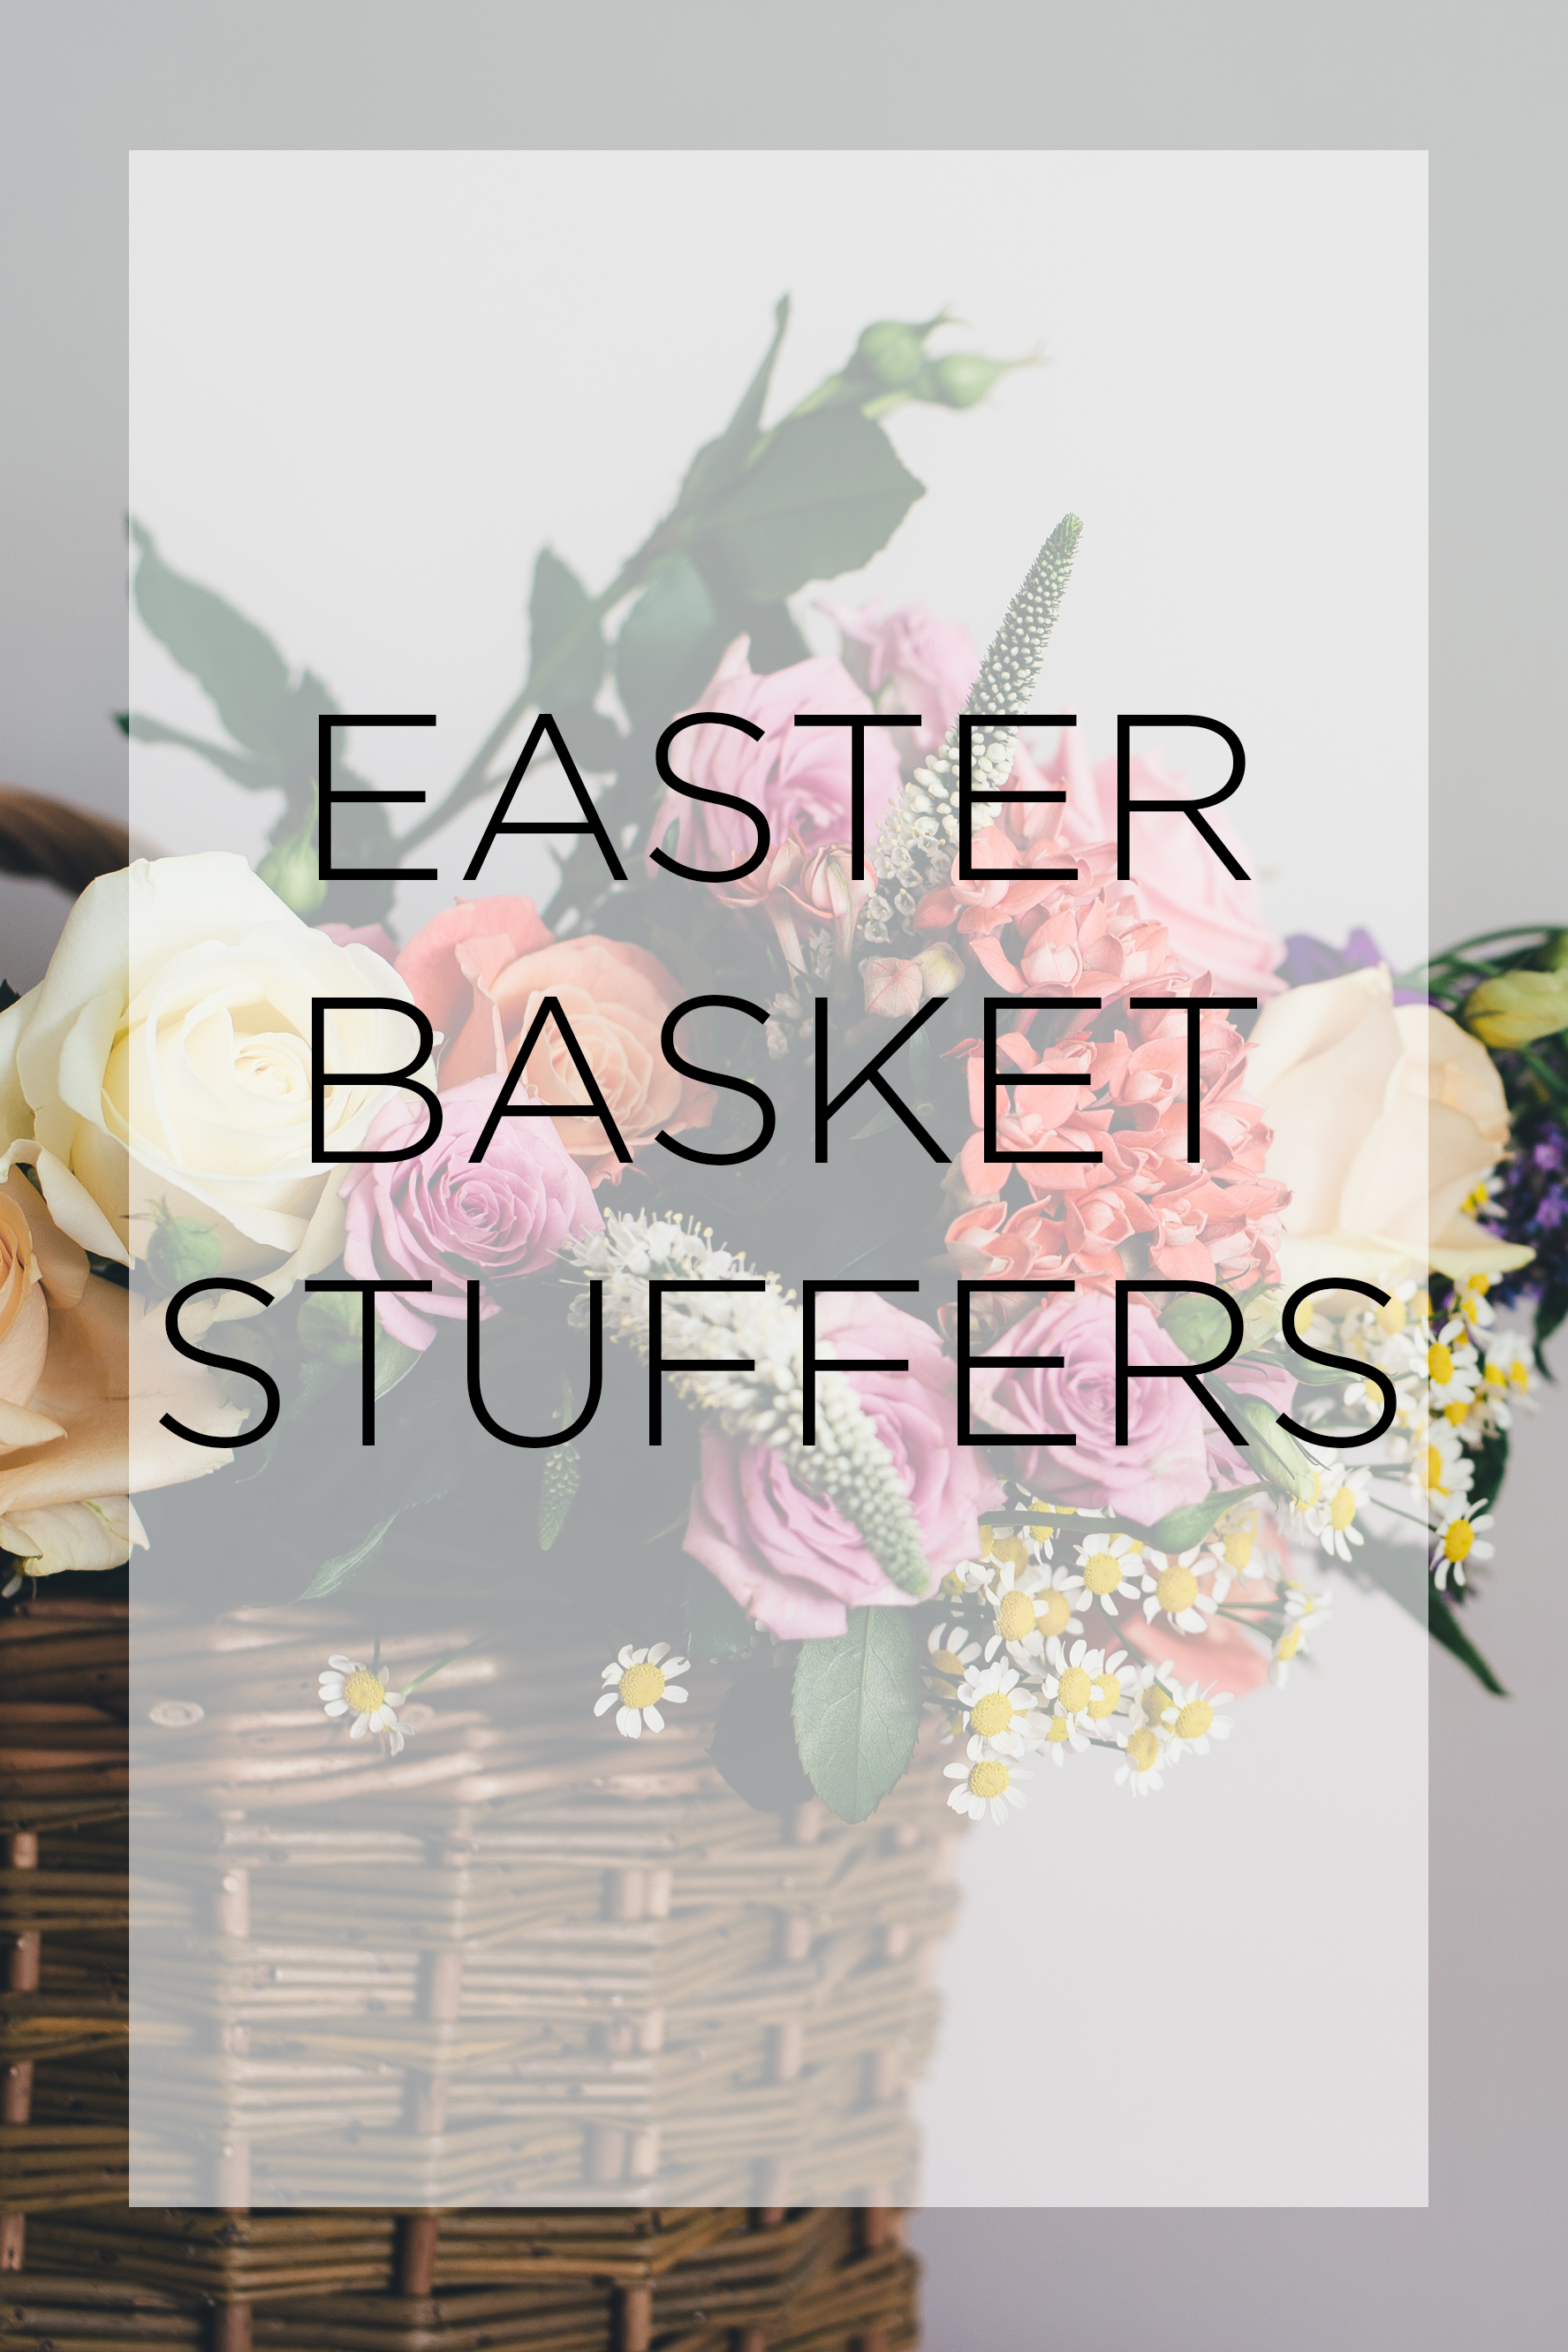 Easter Basket Stuffers 2017 - Midwest In Style